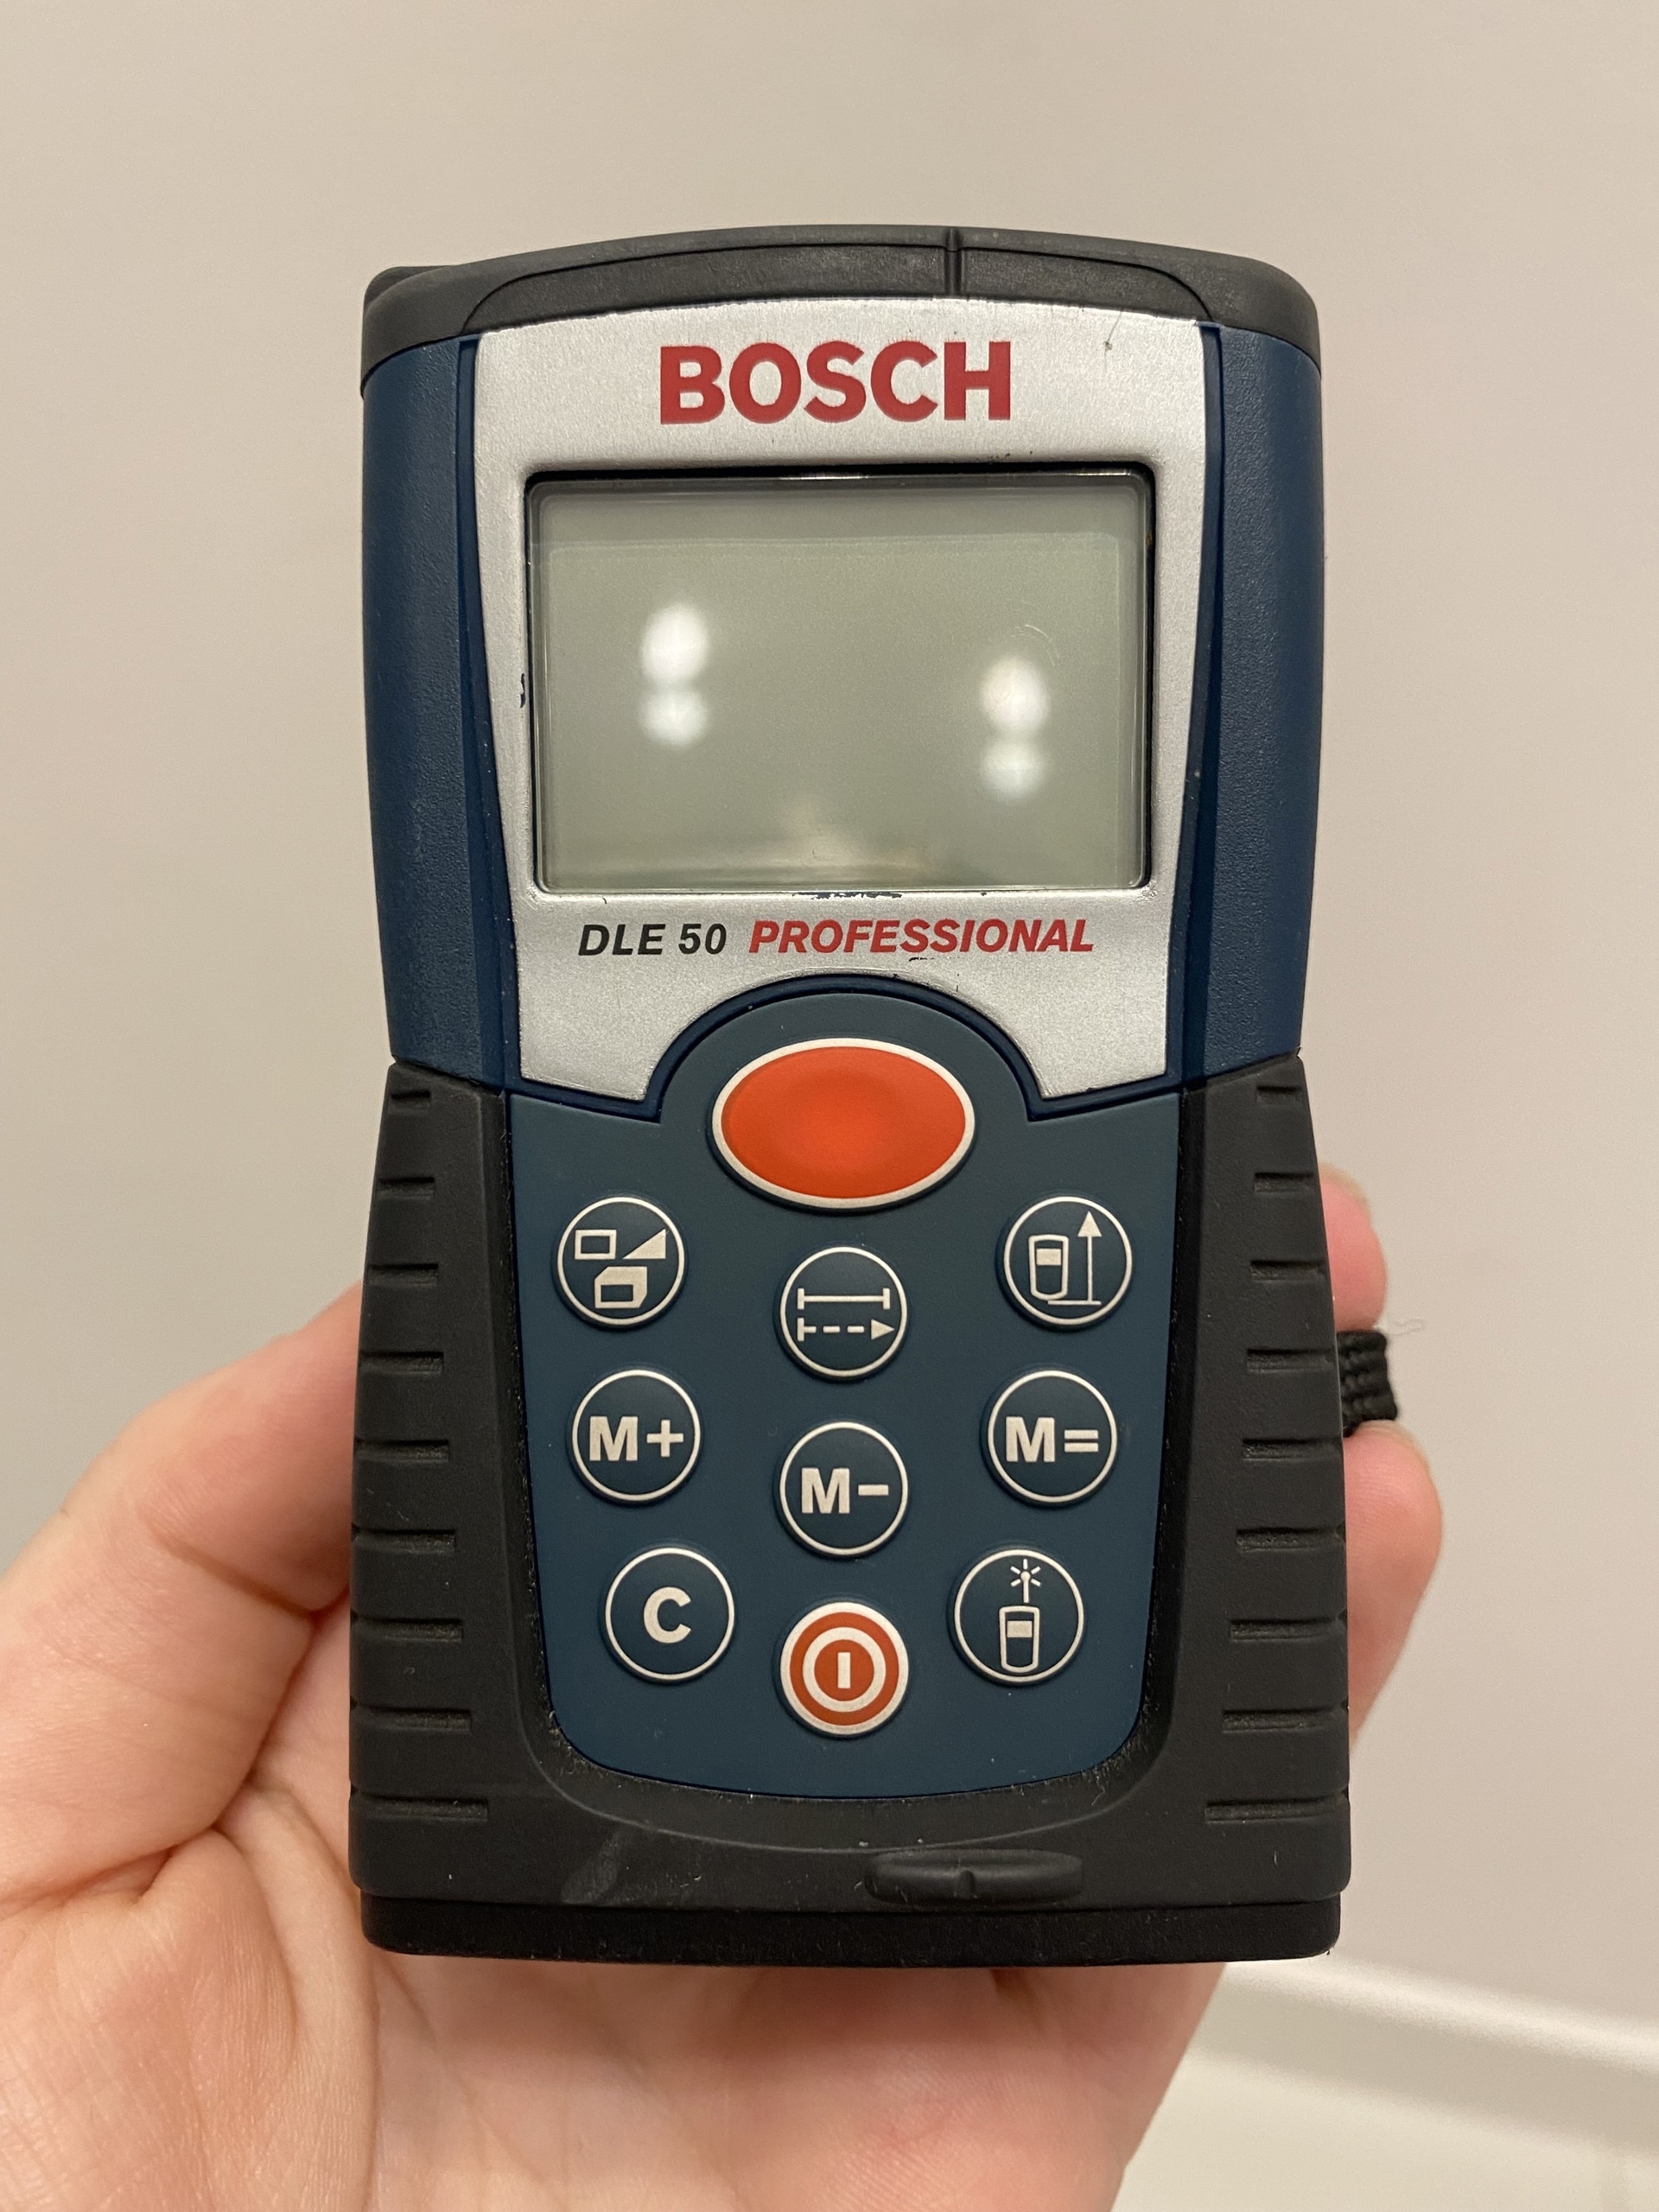 File:Bosch DLE 50.jpg - Wikimedia Commons